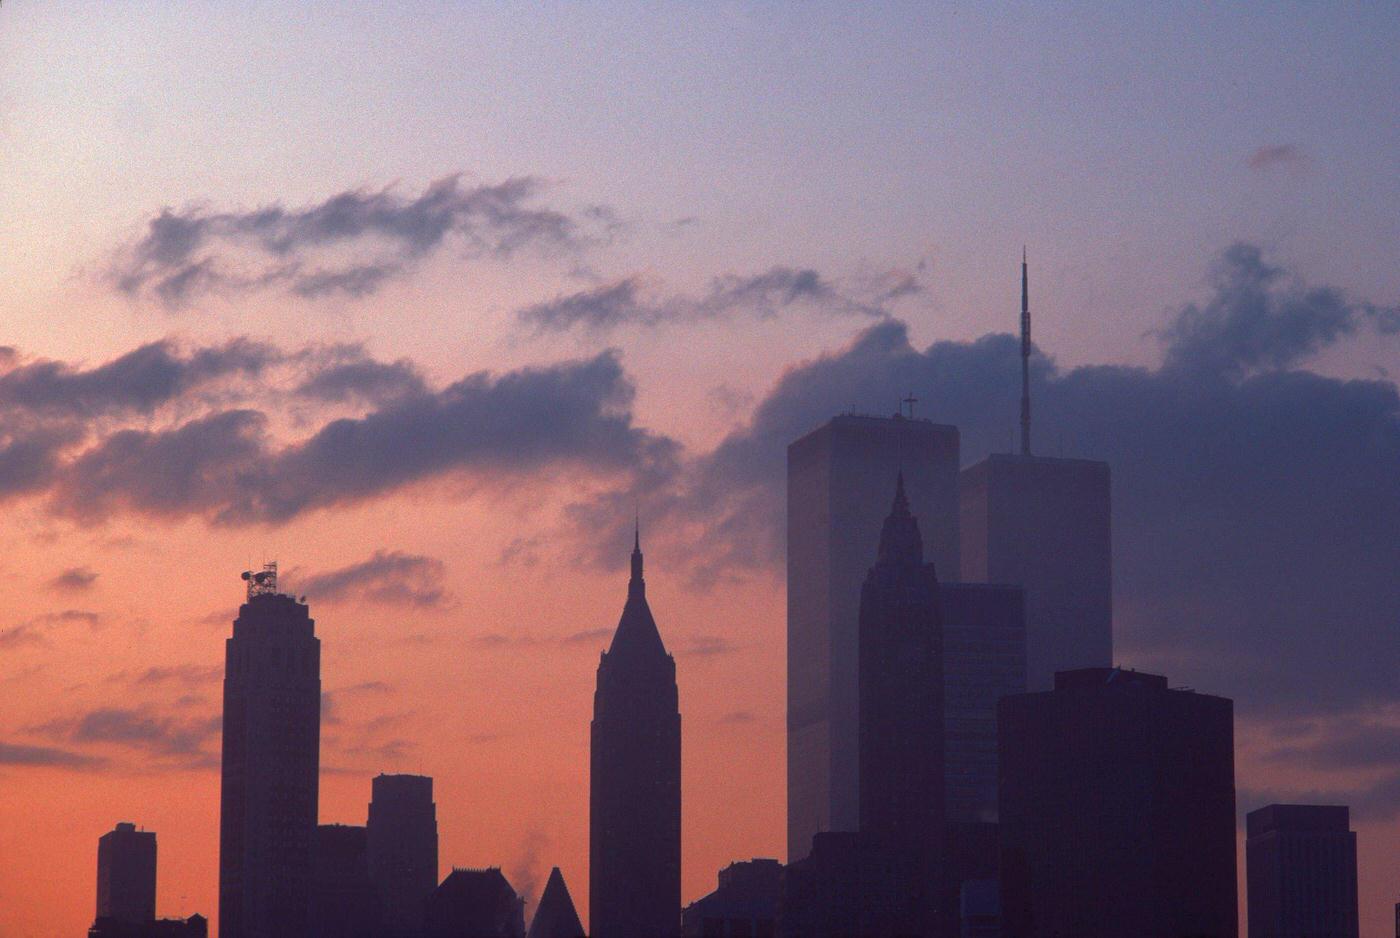 Lower Manhattan At Dusk Showing The Twin Towers Of The World Trade Center, Manhattan, 1983.